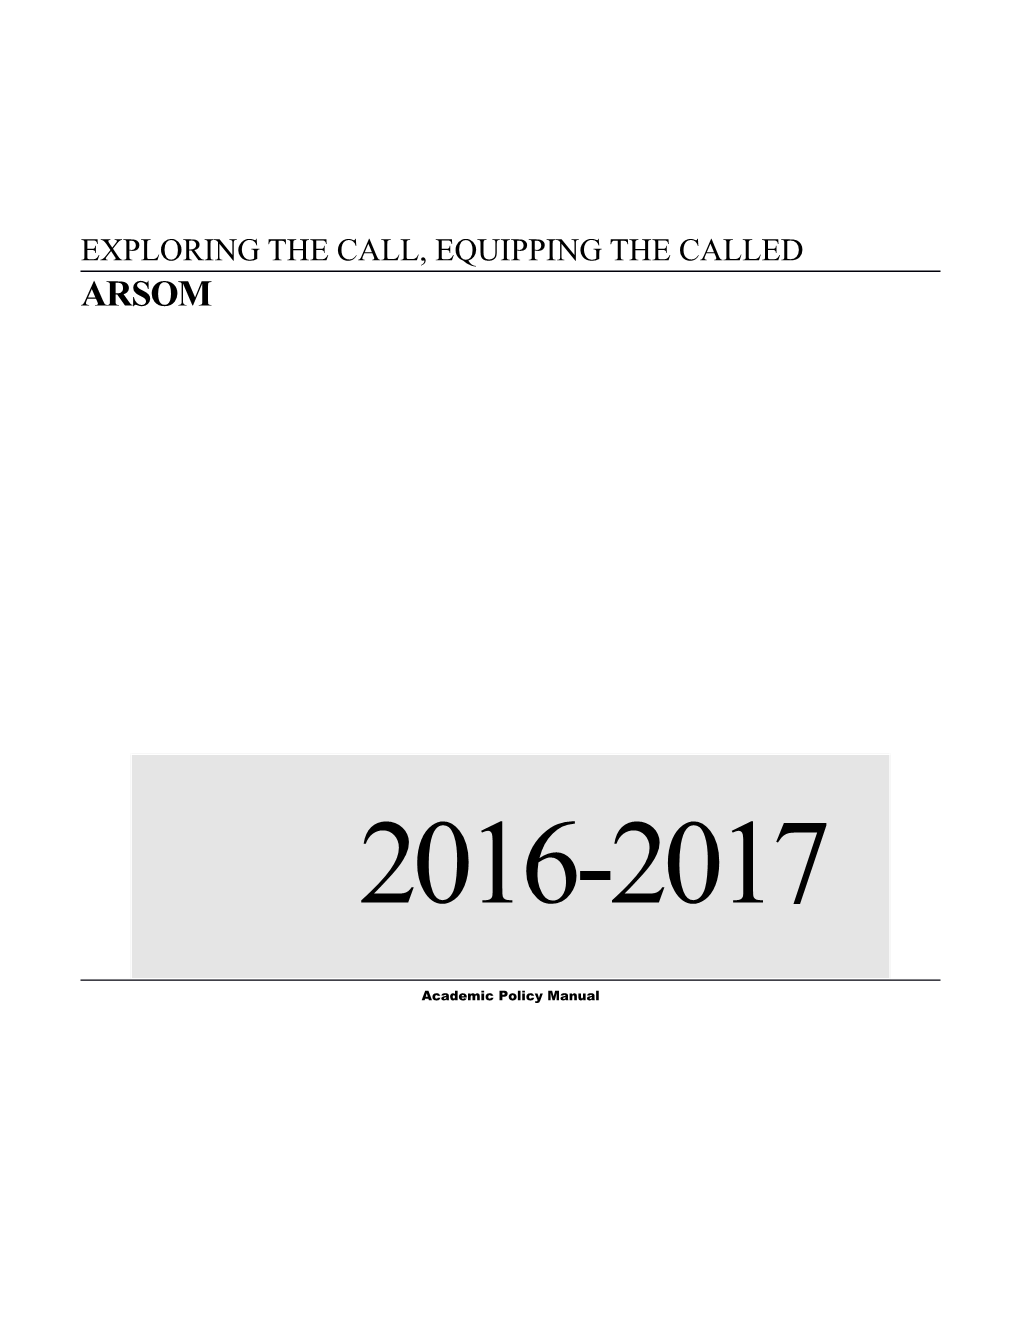 Exploring the Call, Equipping the Called